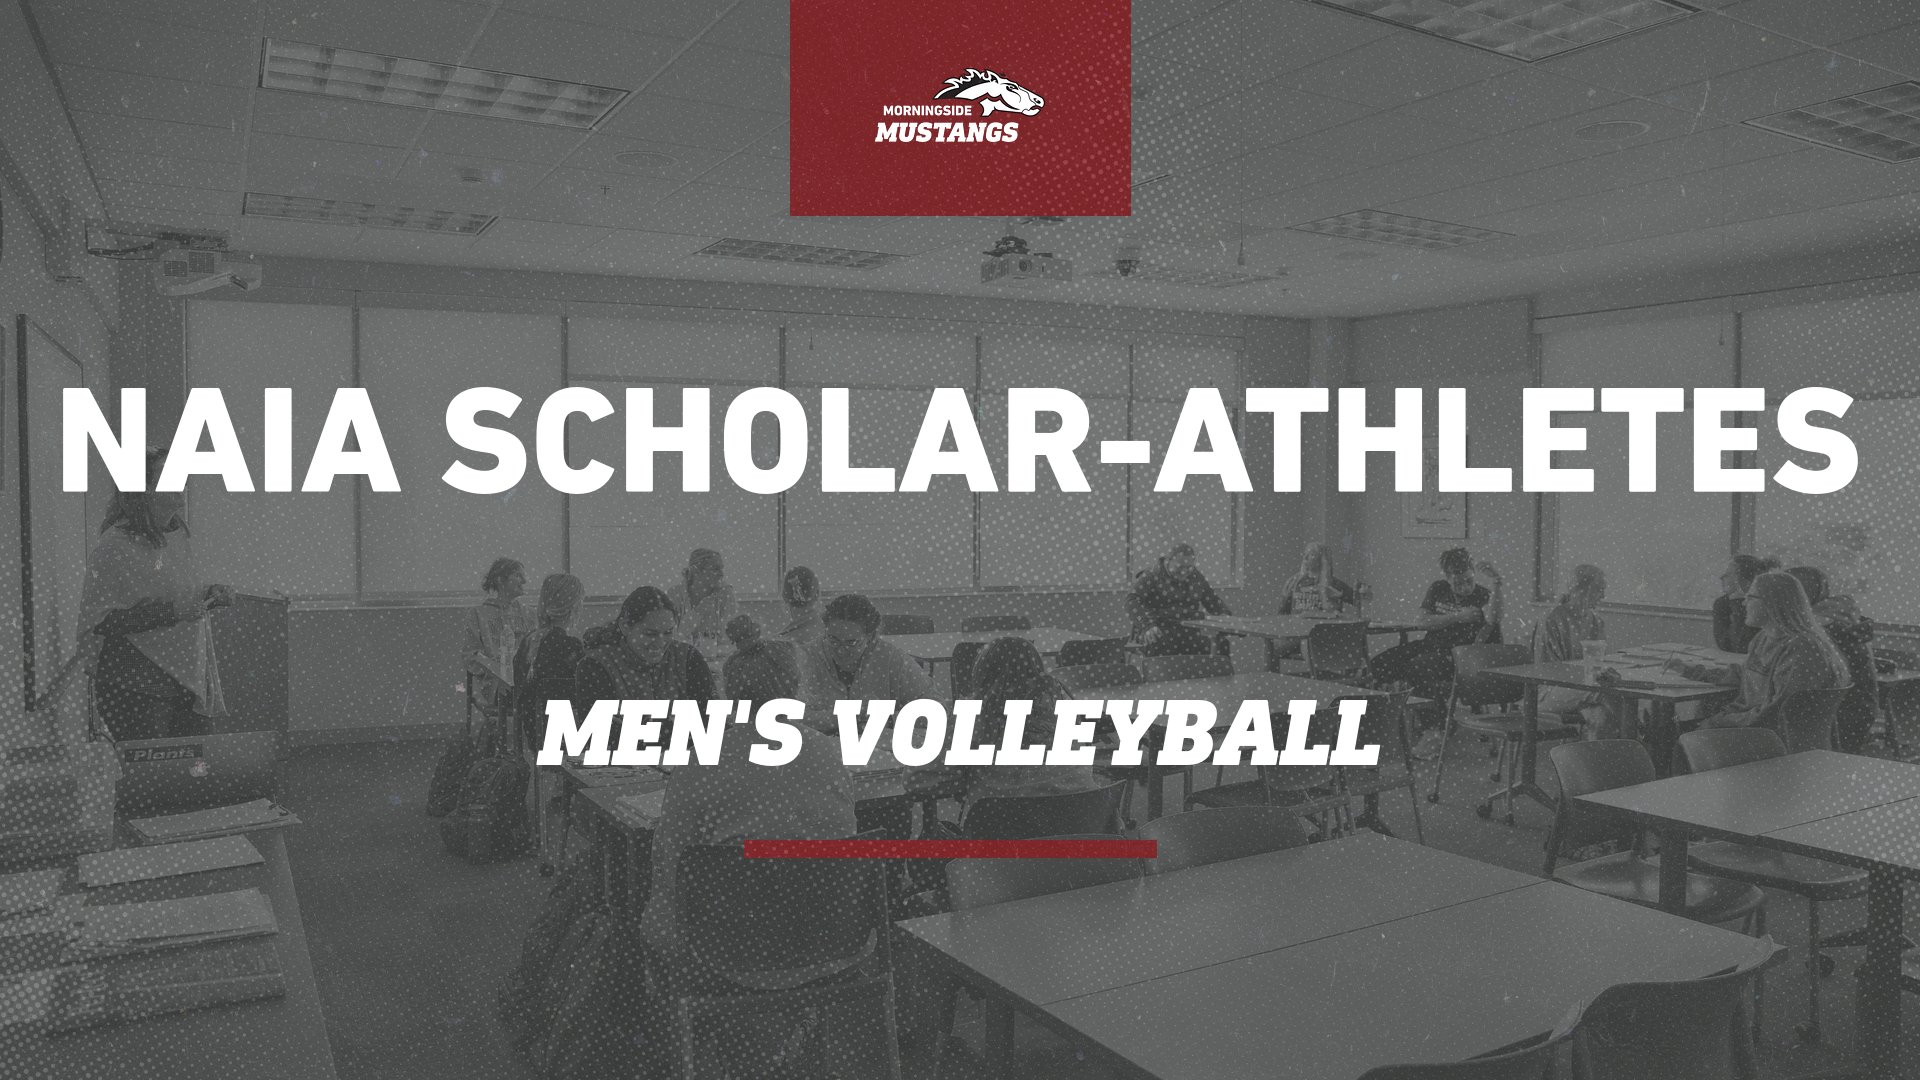 Four Mustangs among men's volleyball Scholar-Athlete honorees